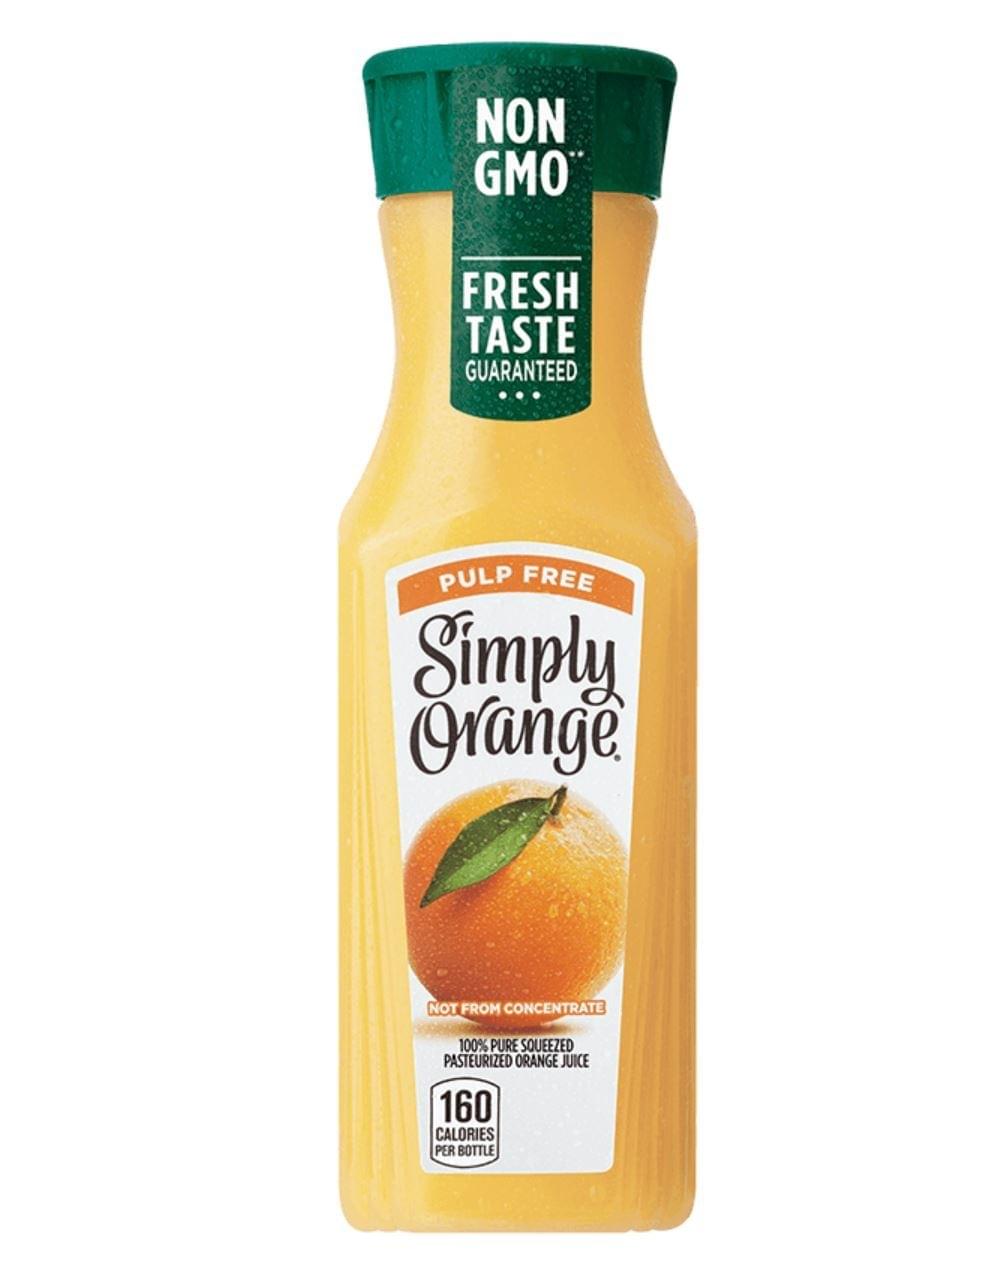 Chick-fil-A Simply Orange Juice Nutrition Facts